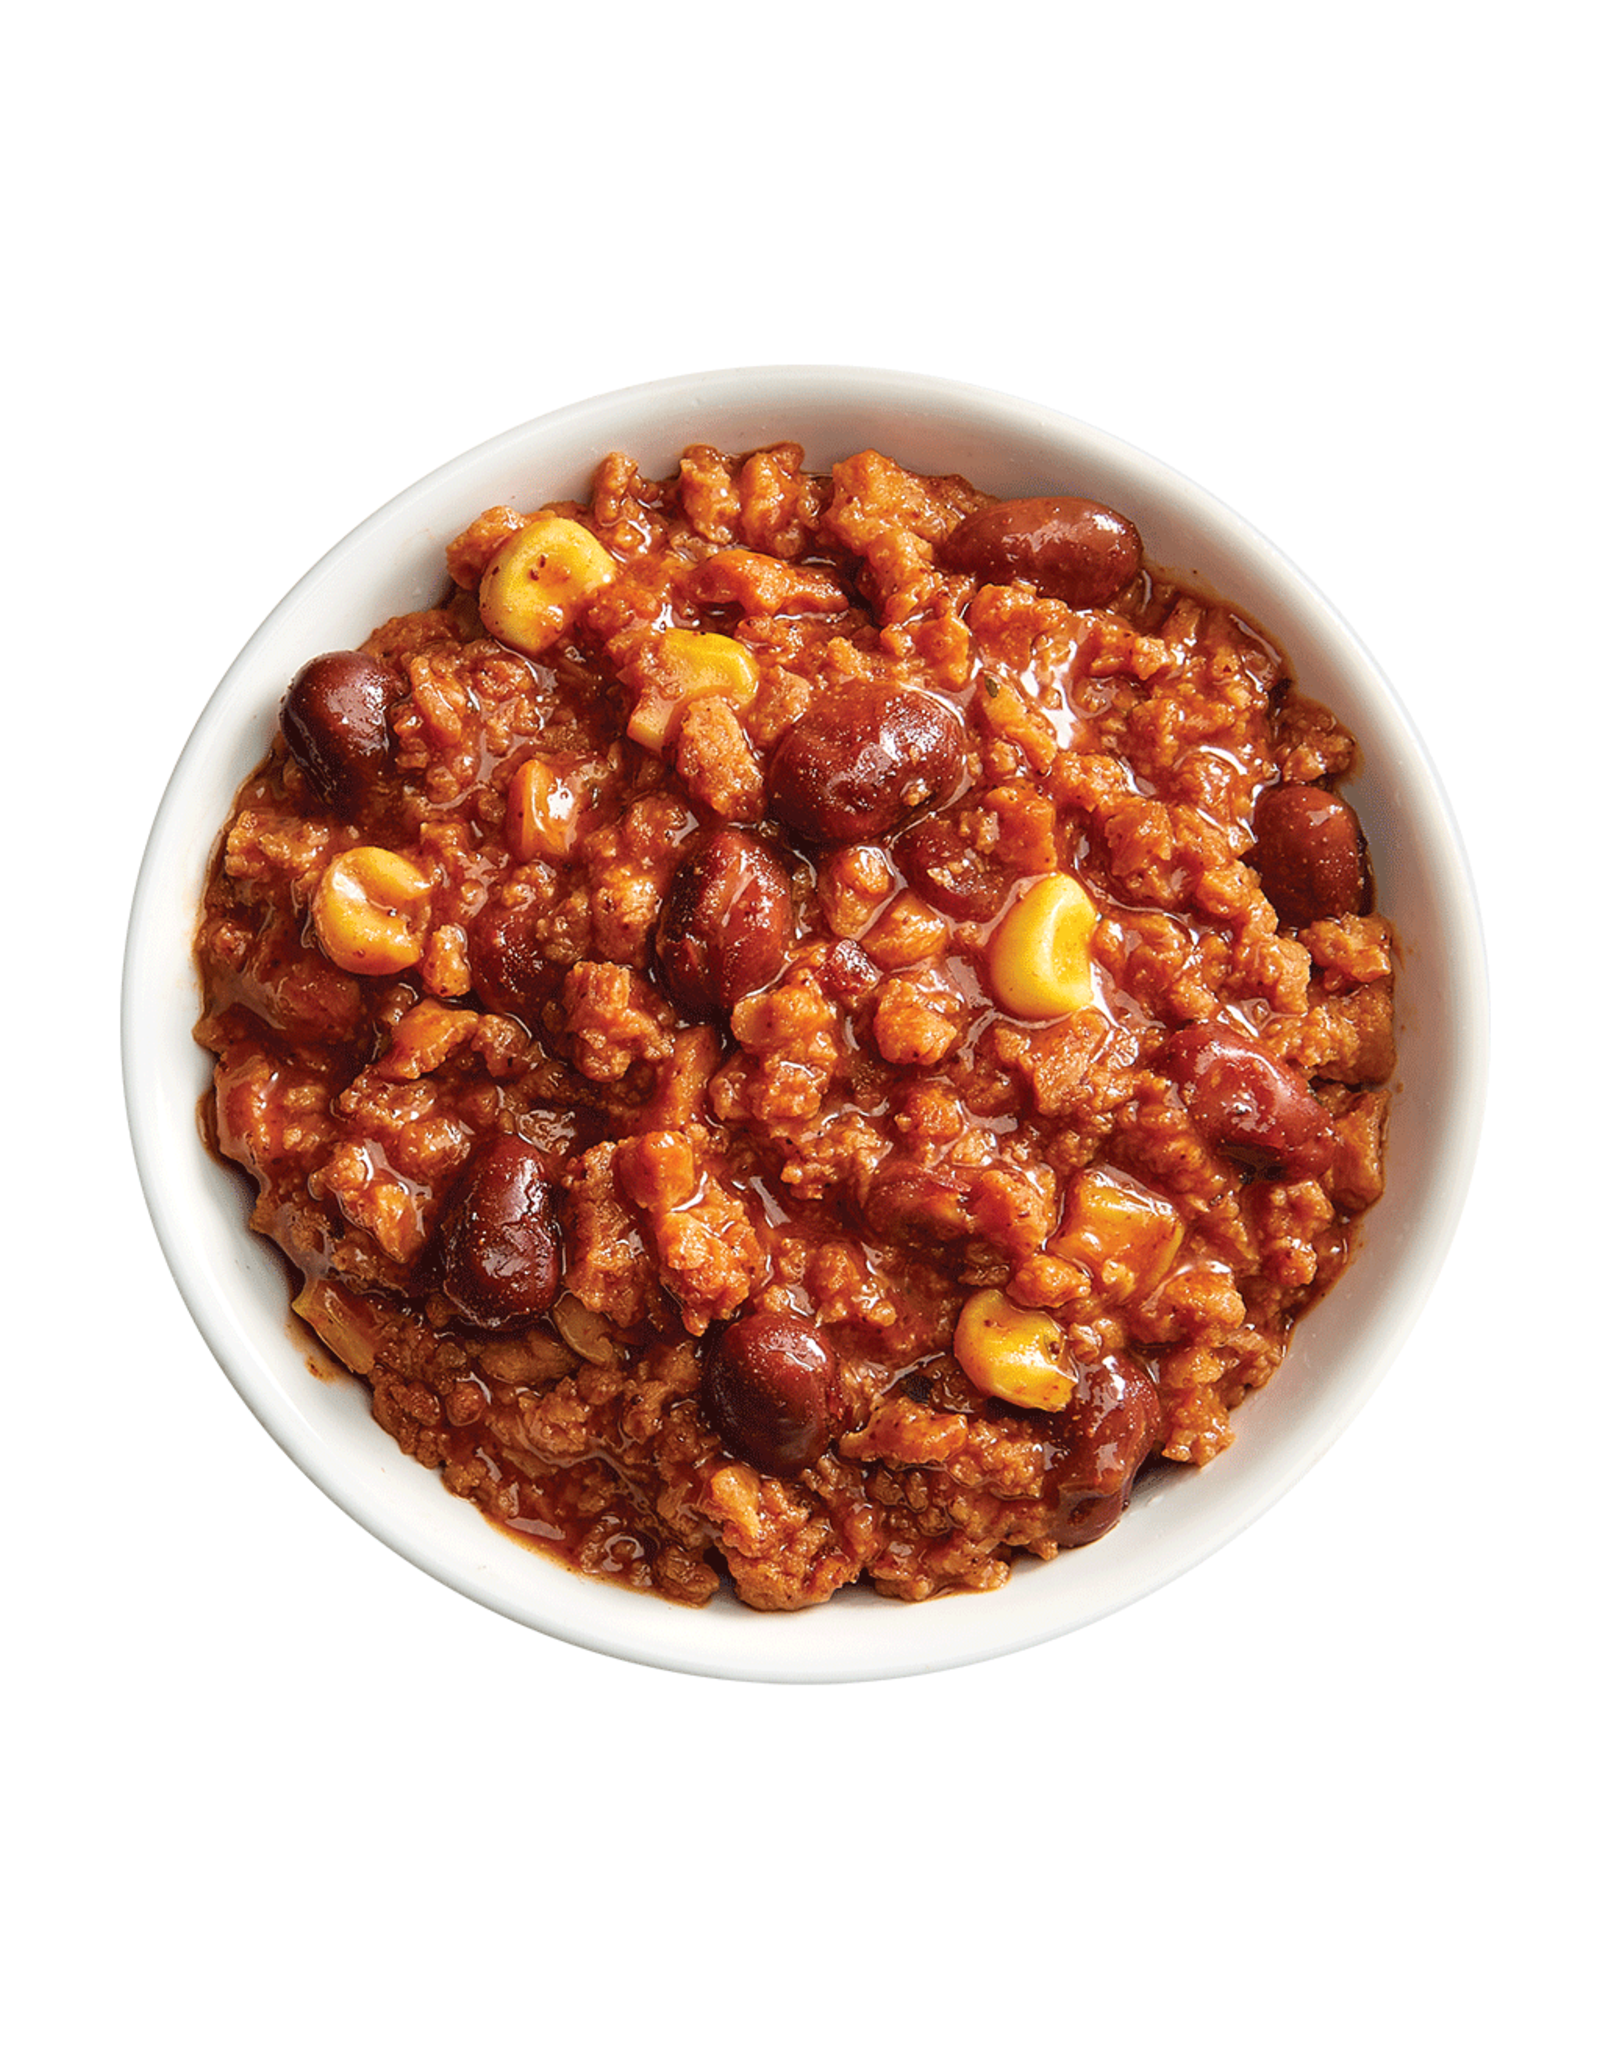 Ideal Protein Unrestricted Chili